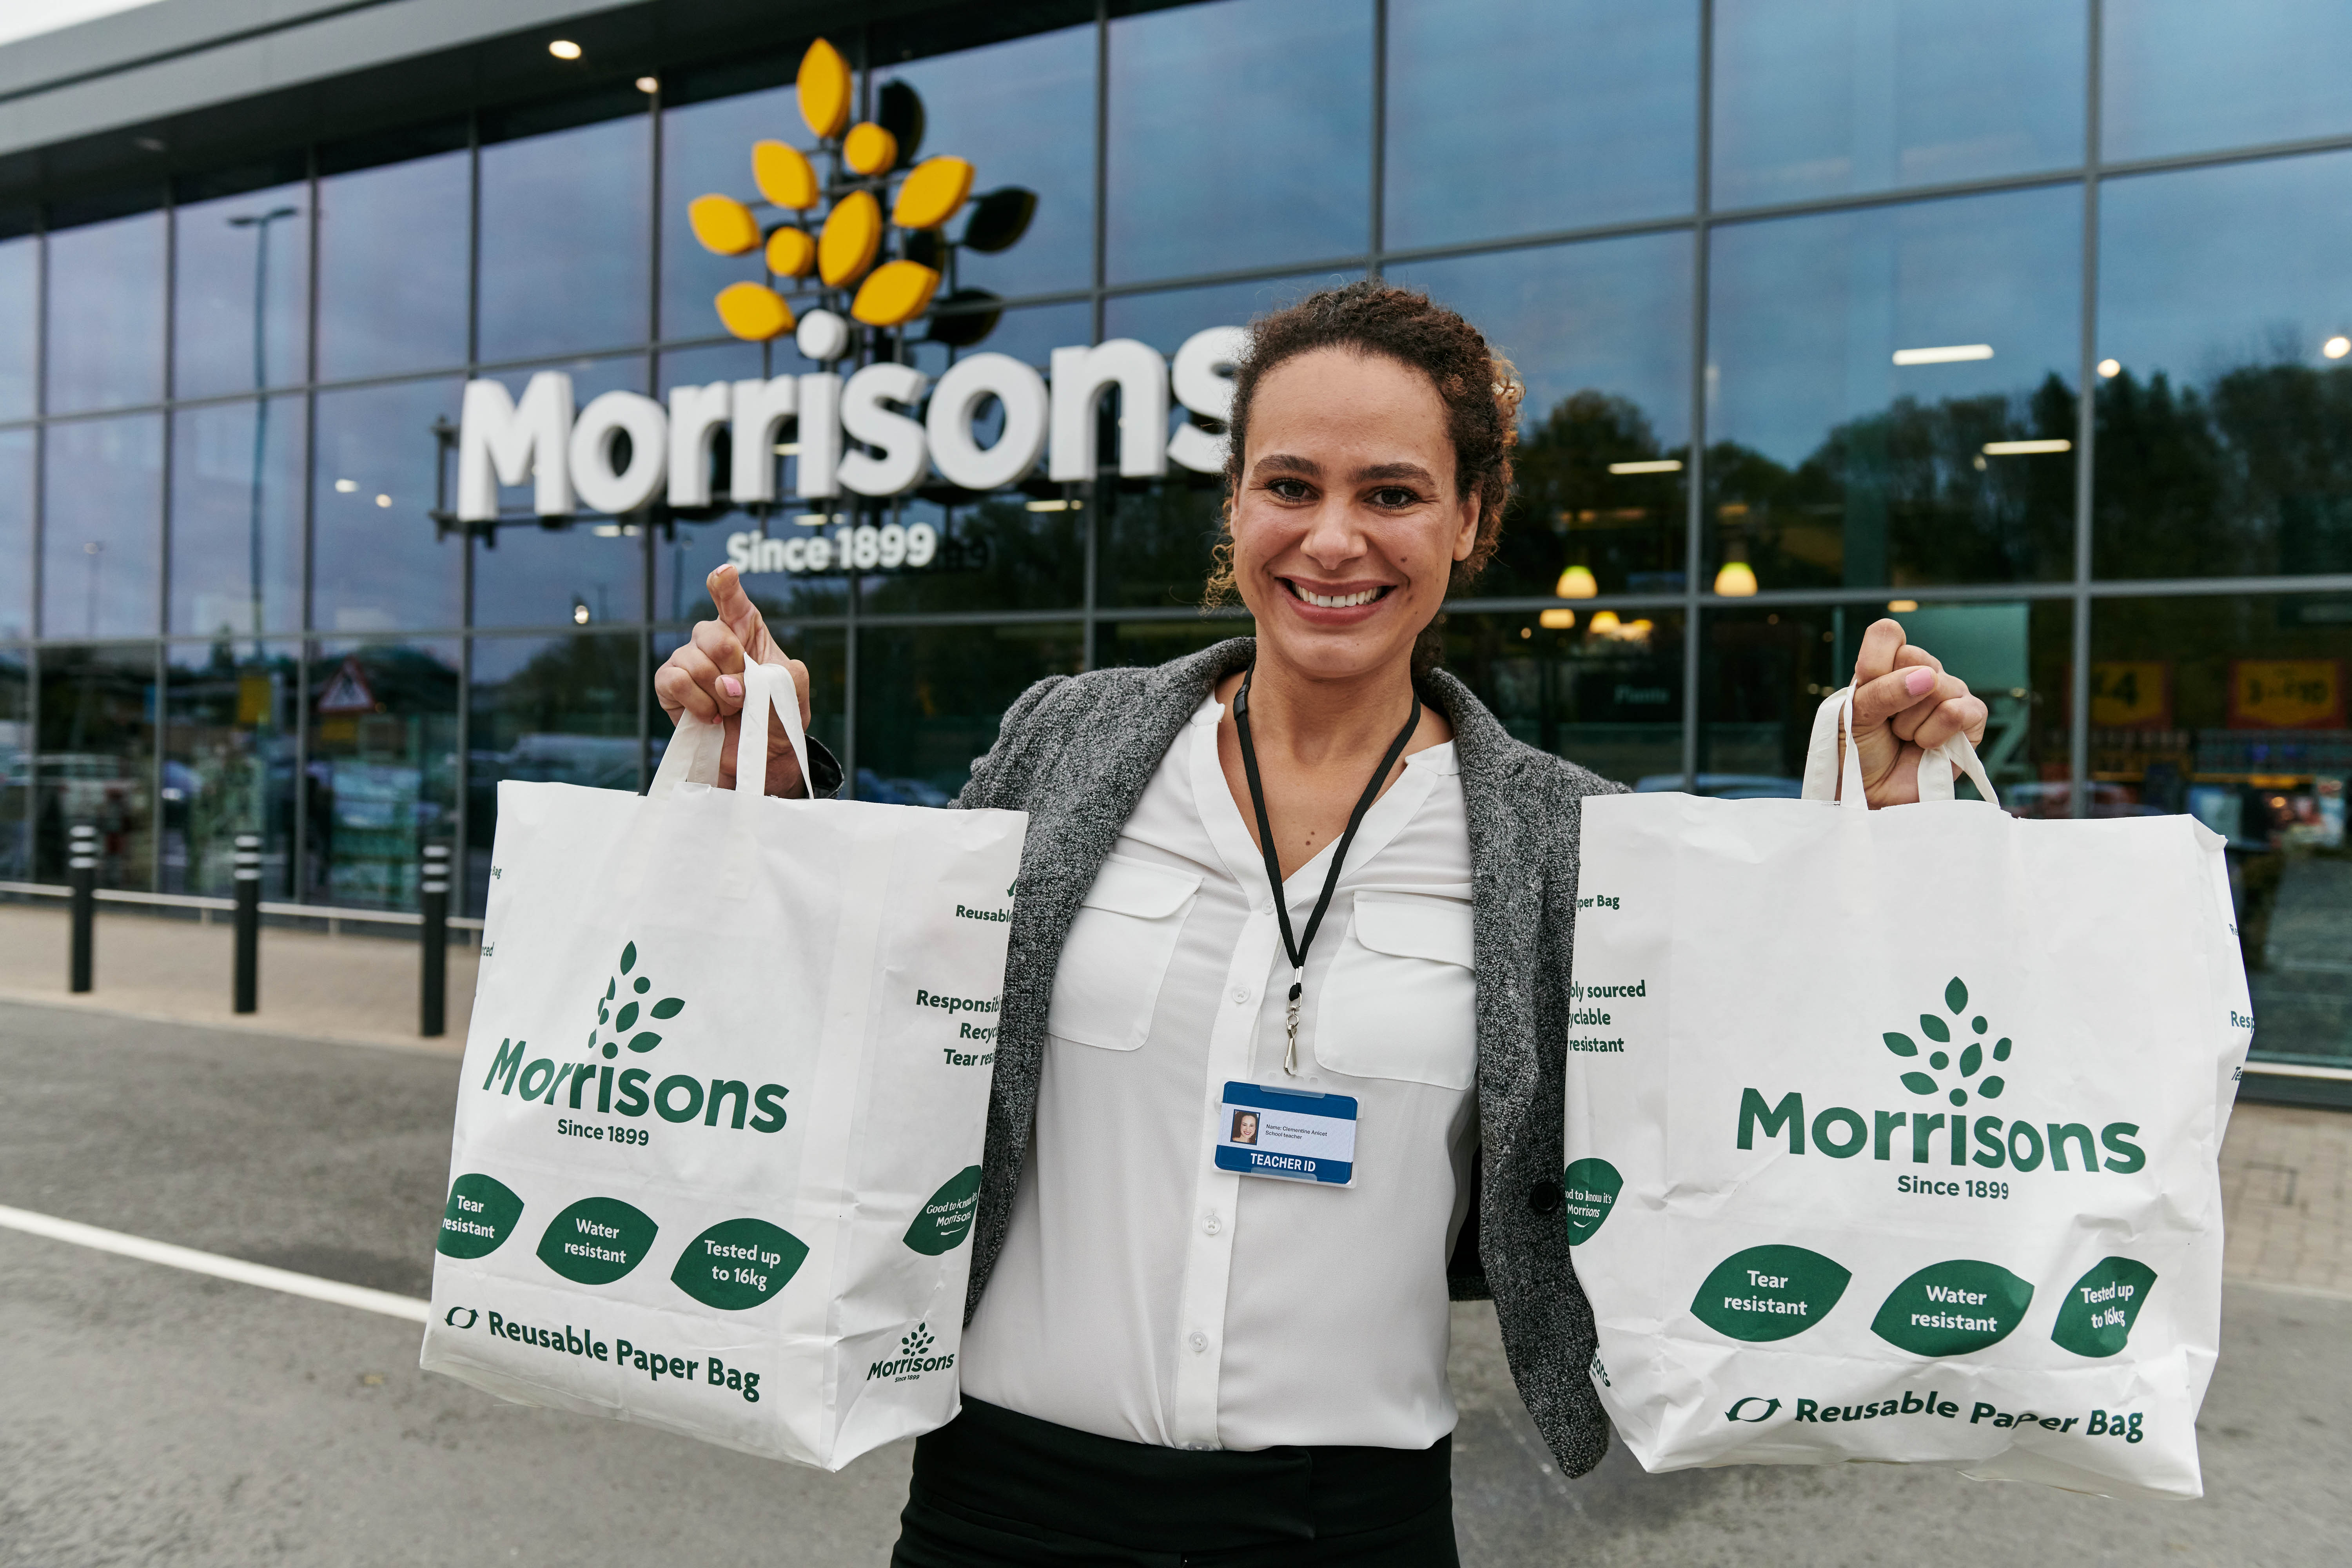 Morrisons offers teachers and school staff 10% off all groceries